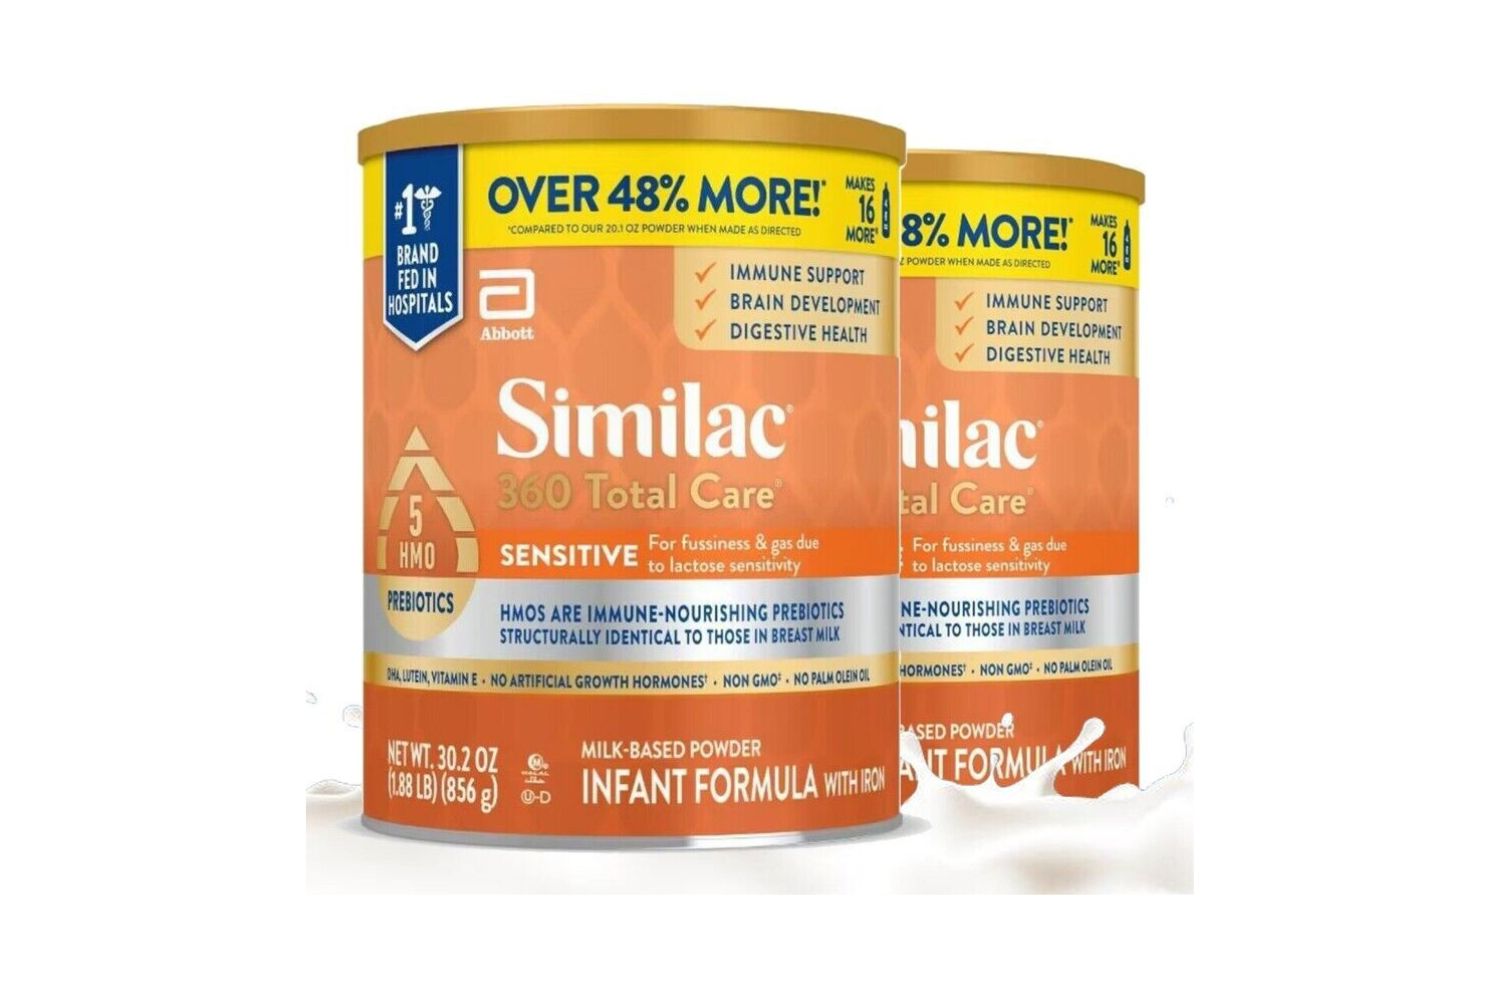 11-intriguing-facts-about-similac-360-total-care-sensitive